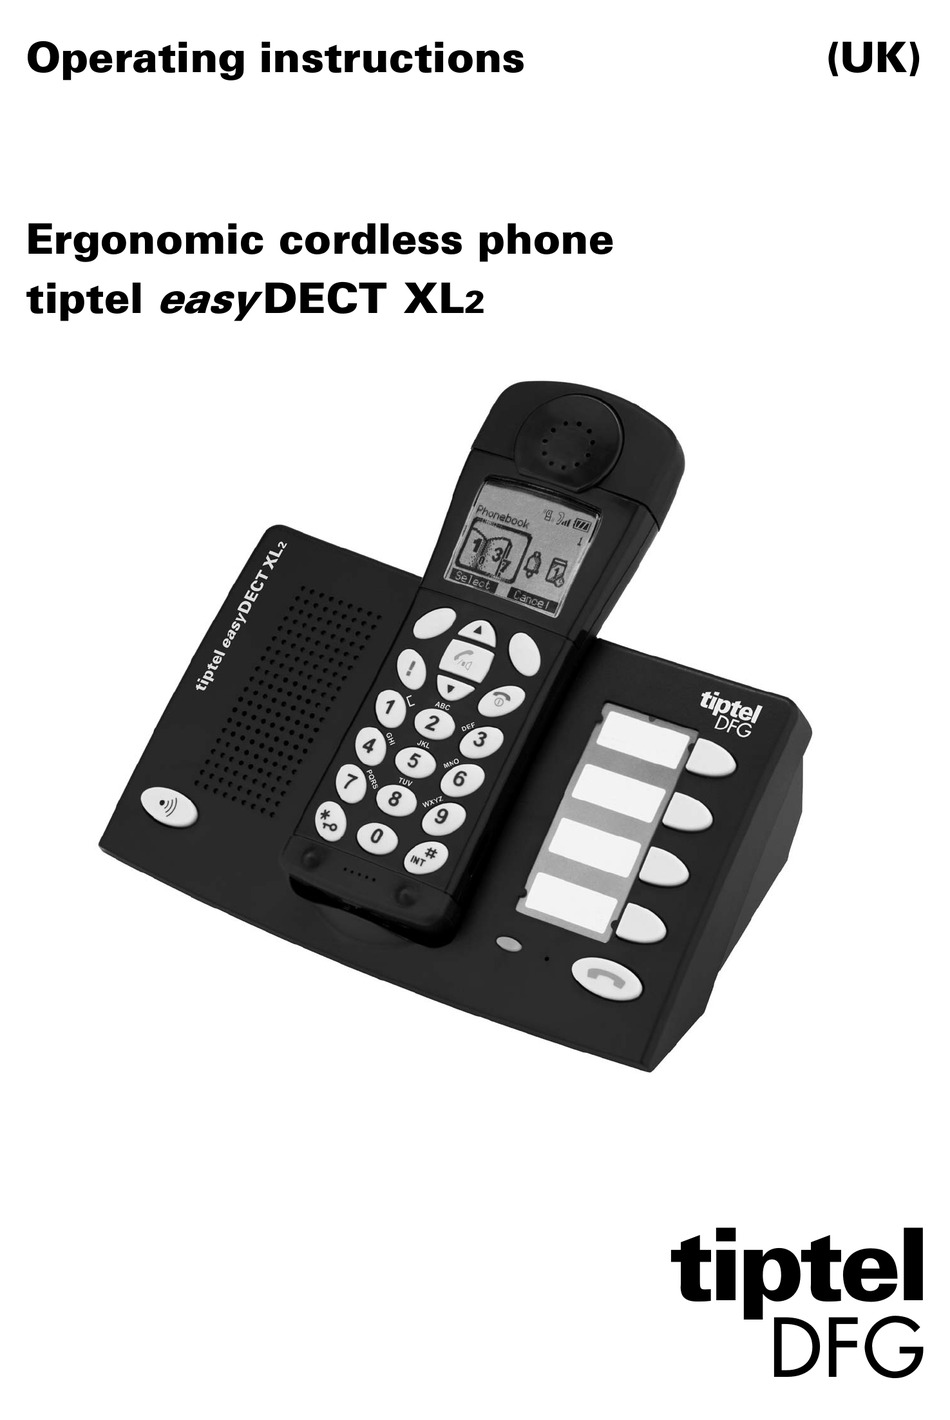 easyDECT XL2